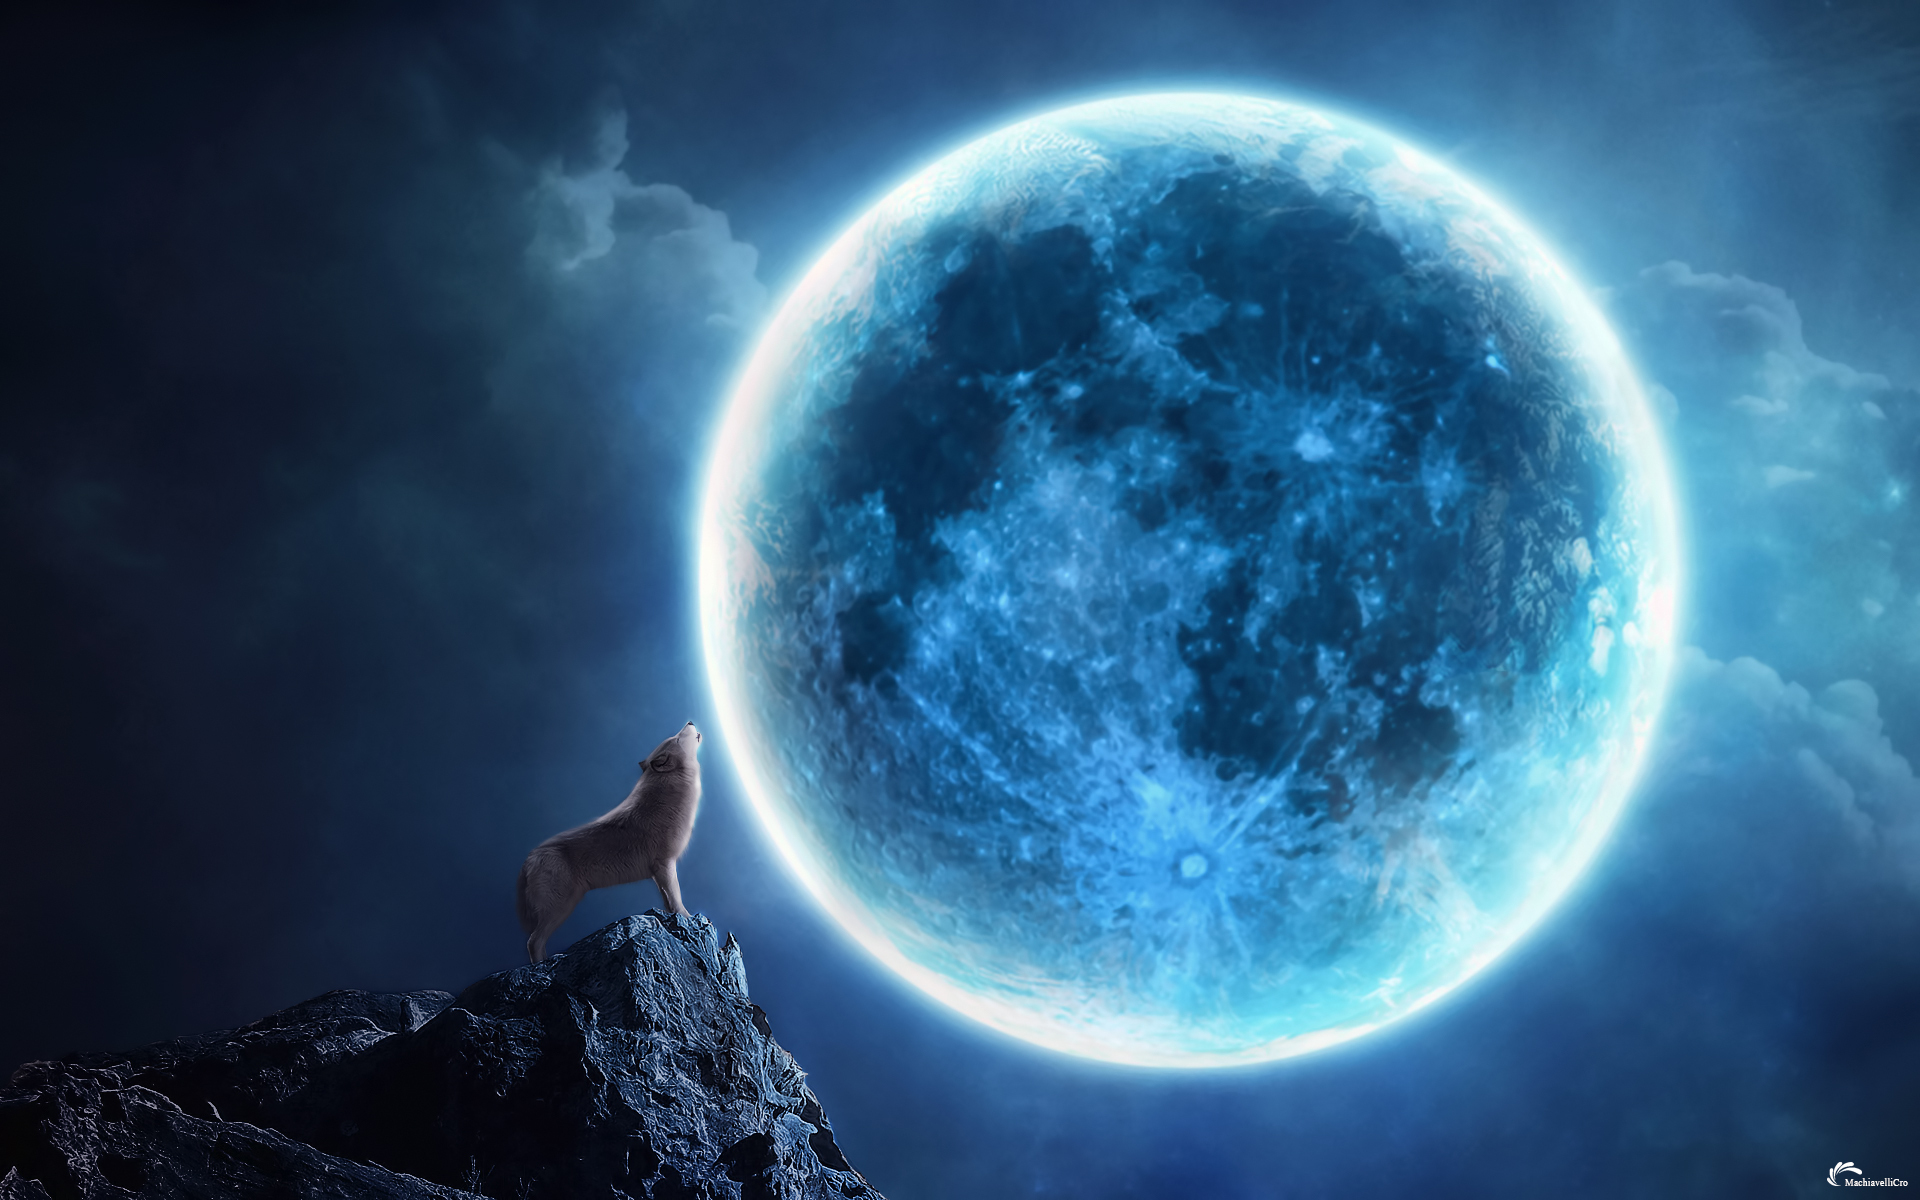 howling, Cg, Digtal, Art, Fantasy, Animals, Dogs, Wolves, Wolf, Landscapes, Night, Moonlight, Moon, Sky, Clouds, Magic, Mood Wallpaper